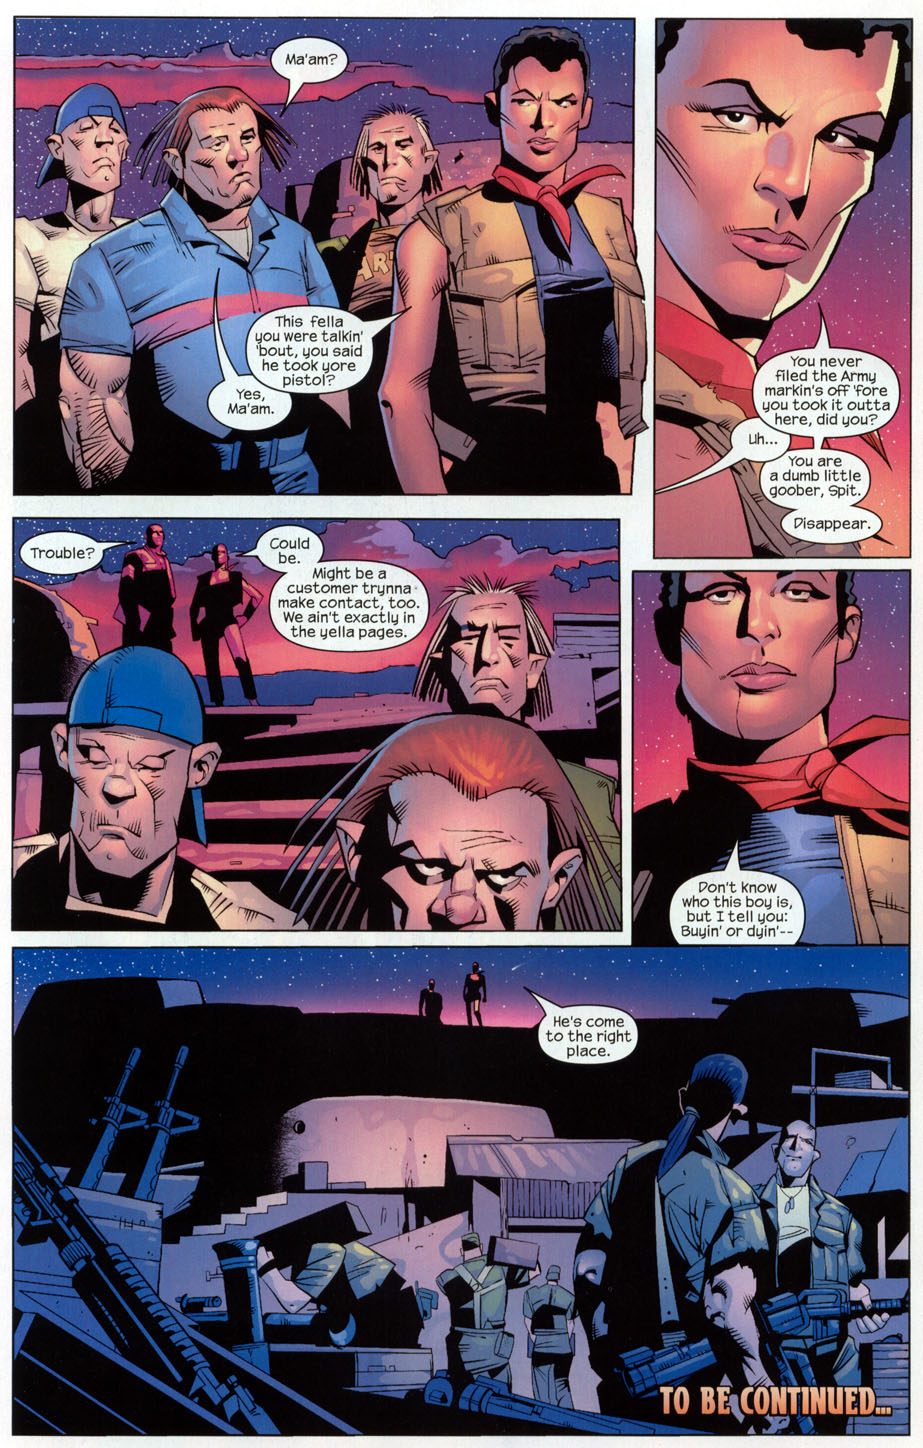 The Punisher (2001) issue 28 - Streets of Laredo #01 - Page 23